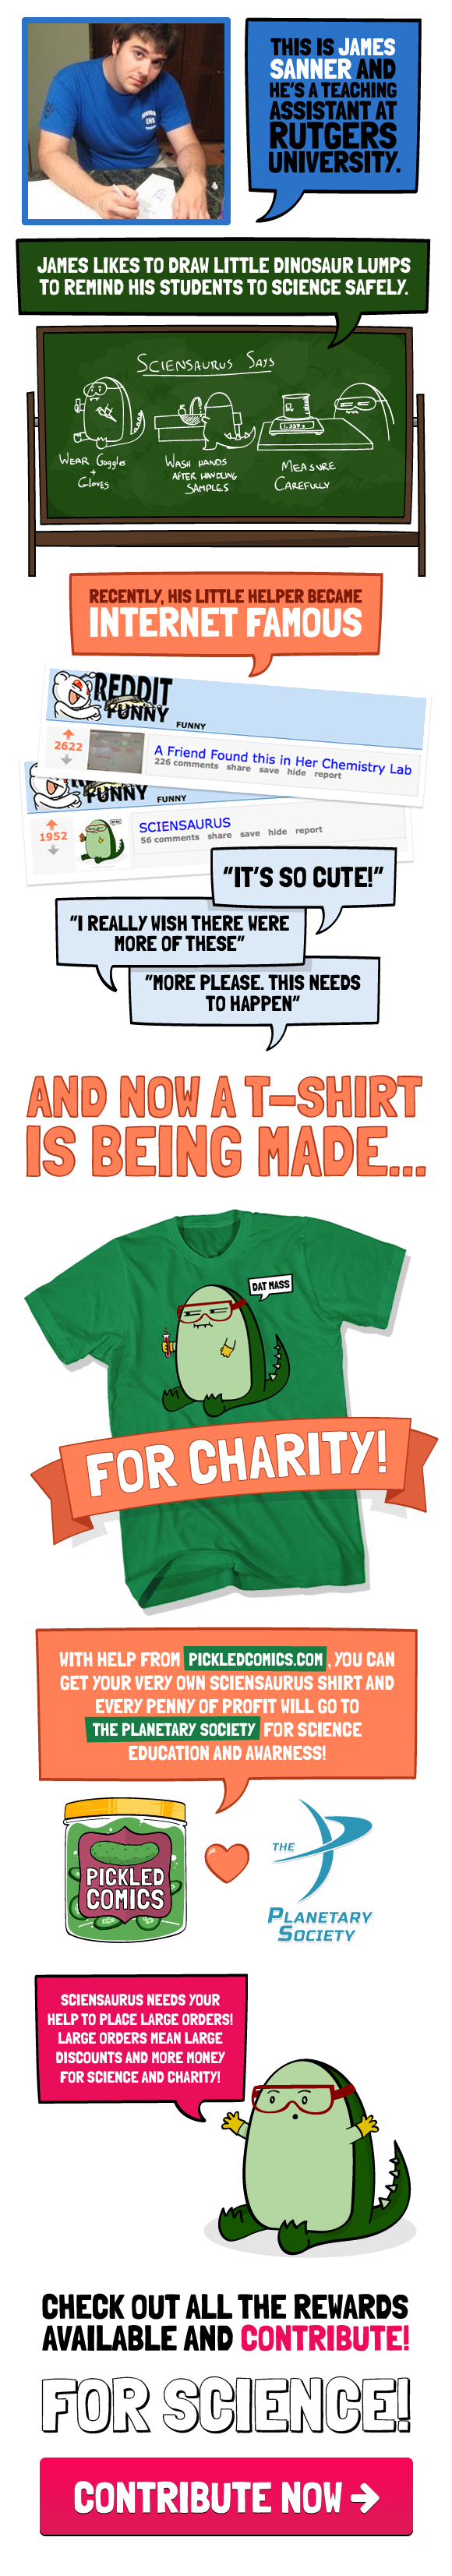 Sciensaurus raised money for The Planetary Society with a shirt on indiegogo.